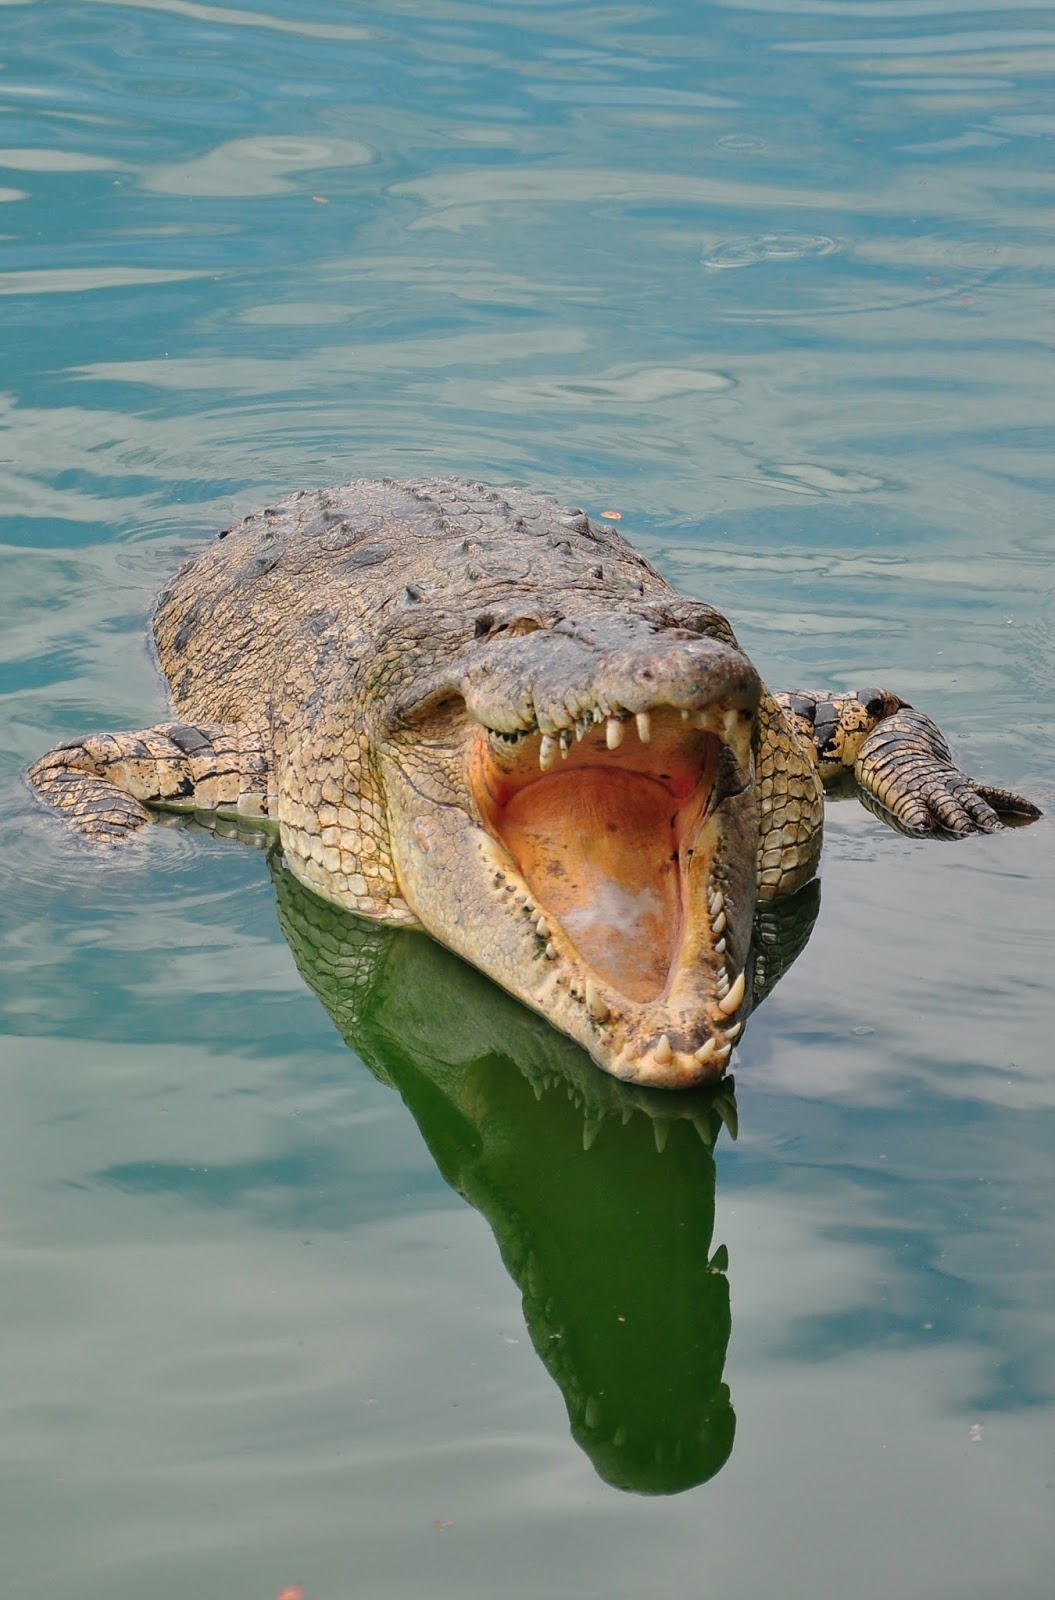 A picture of a crocodile with mouth wide open.